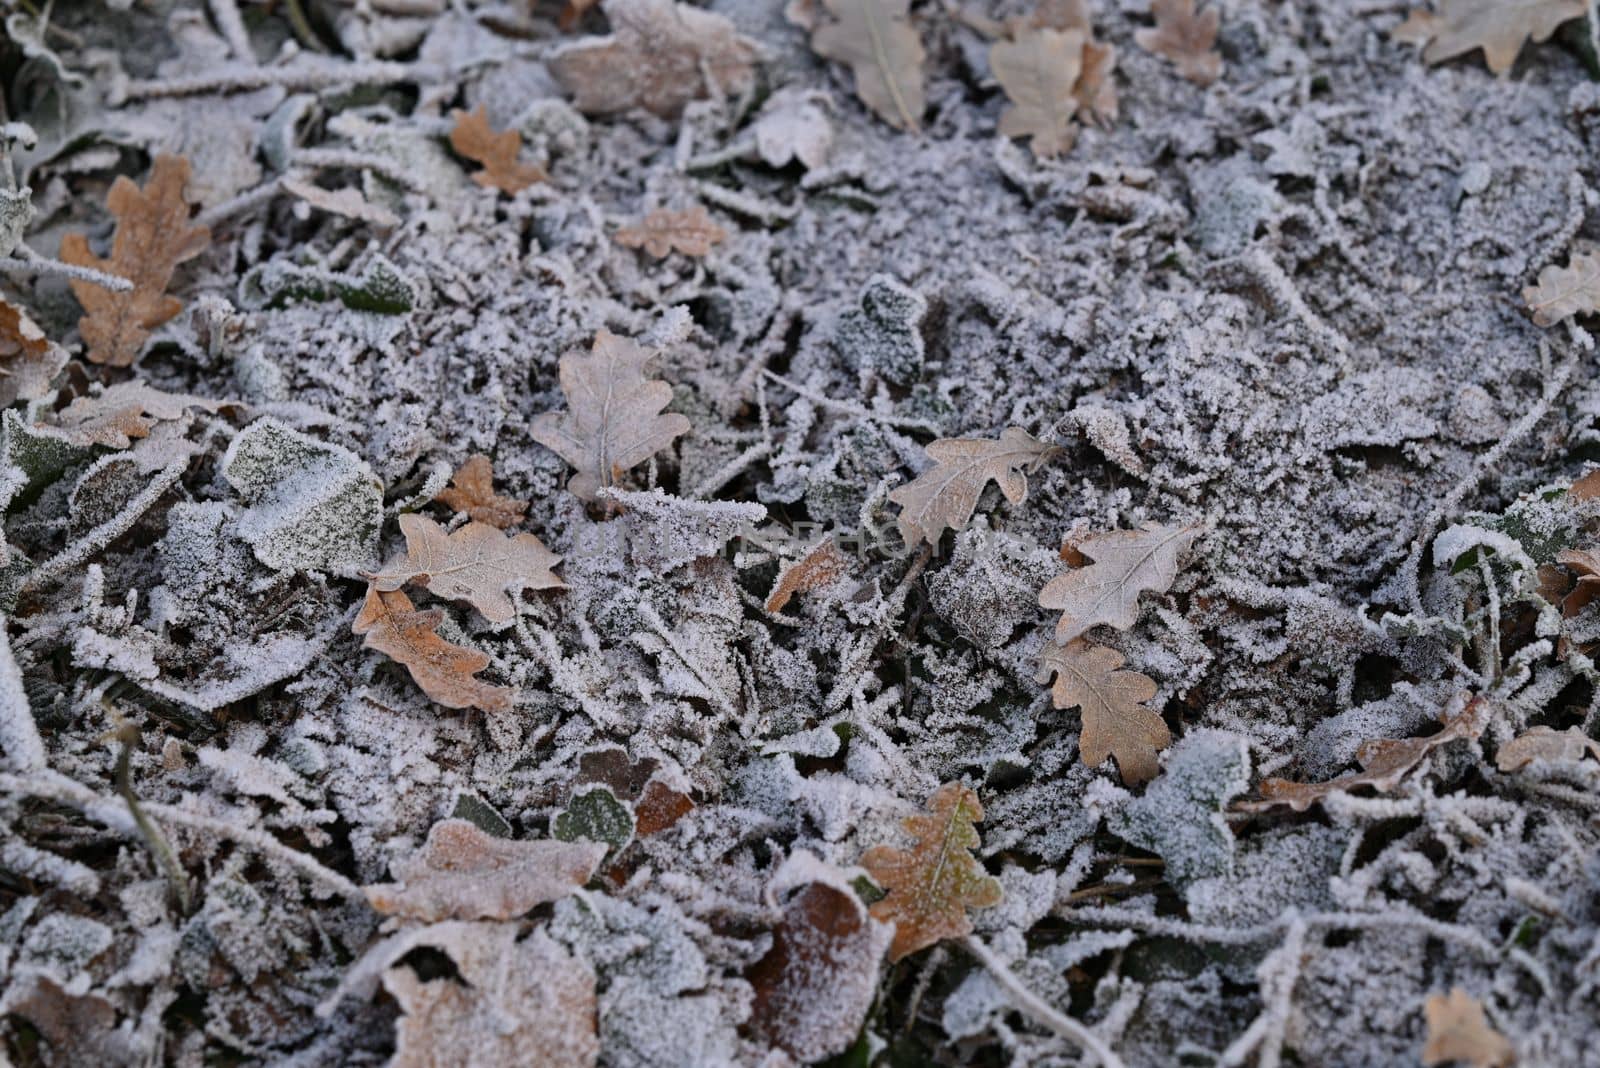 Frozen brown leaves on the forest floor, by Luise123